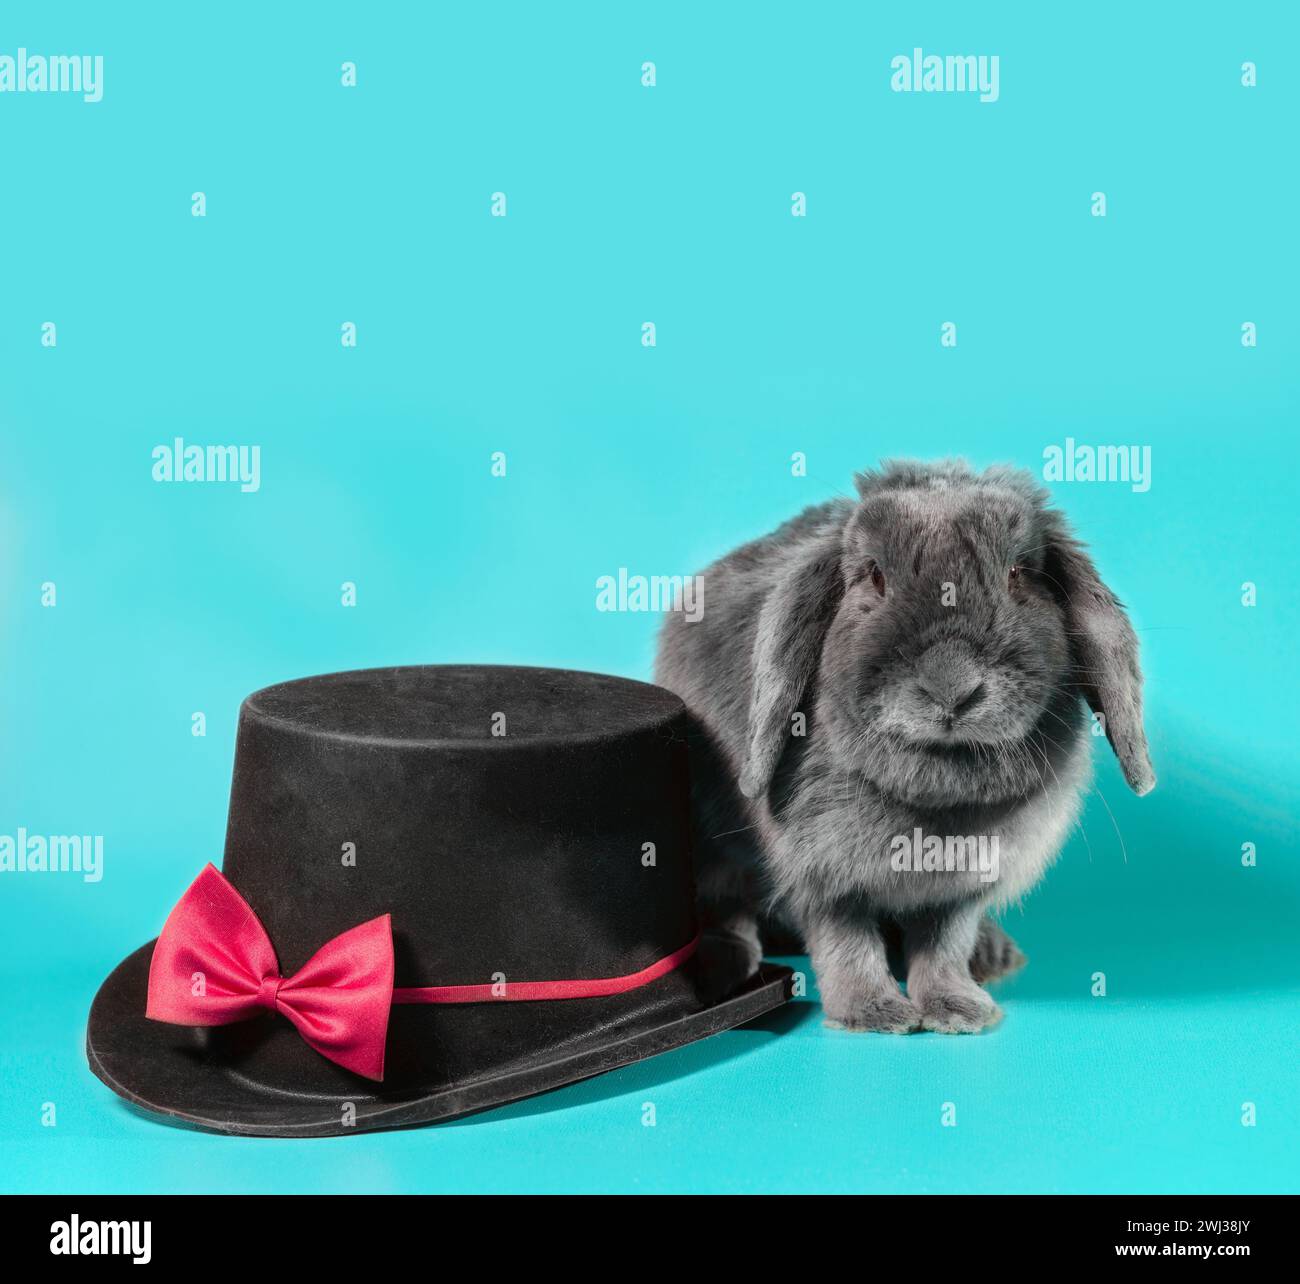 Lop-eared dwarf rabbit next to a black cylinder hat on a turquoise background Stock Photo